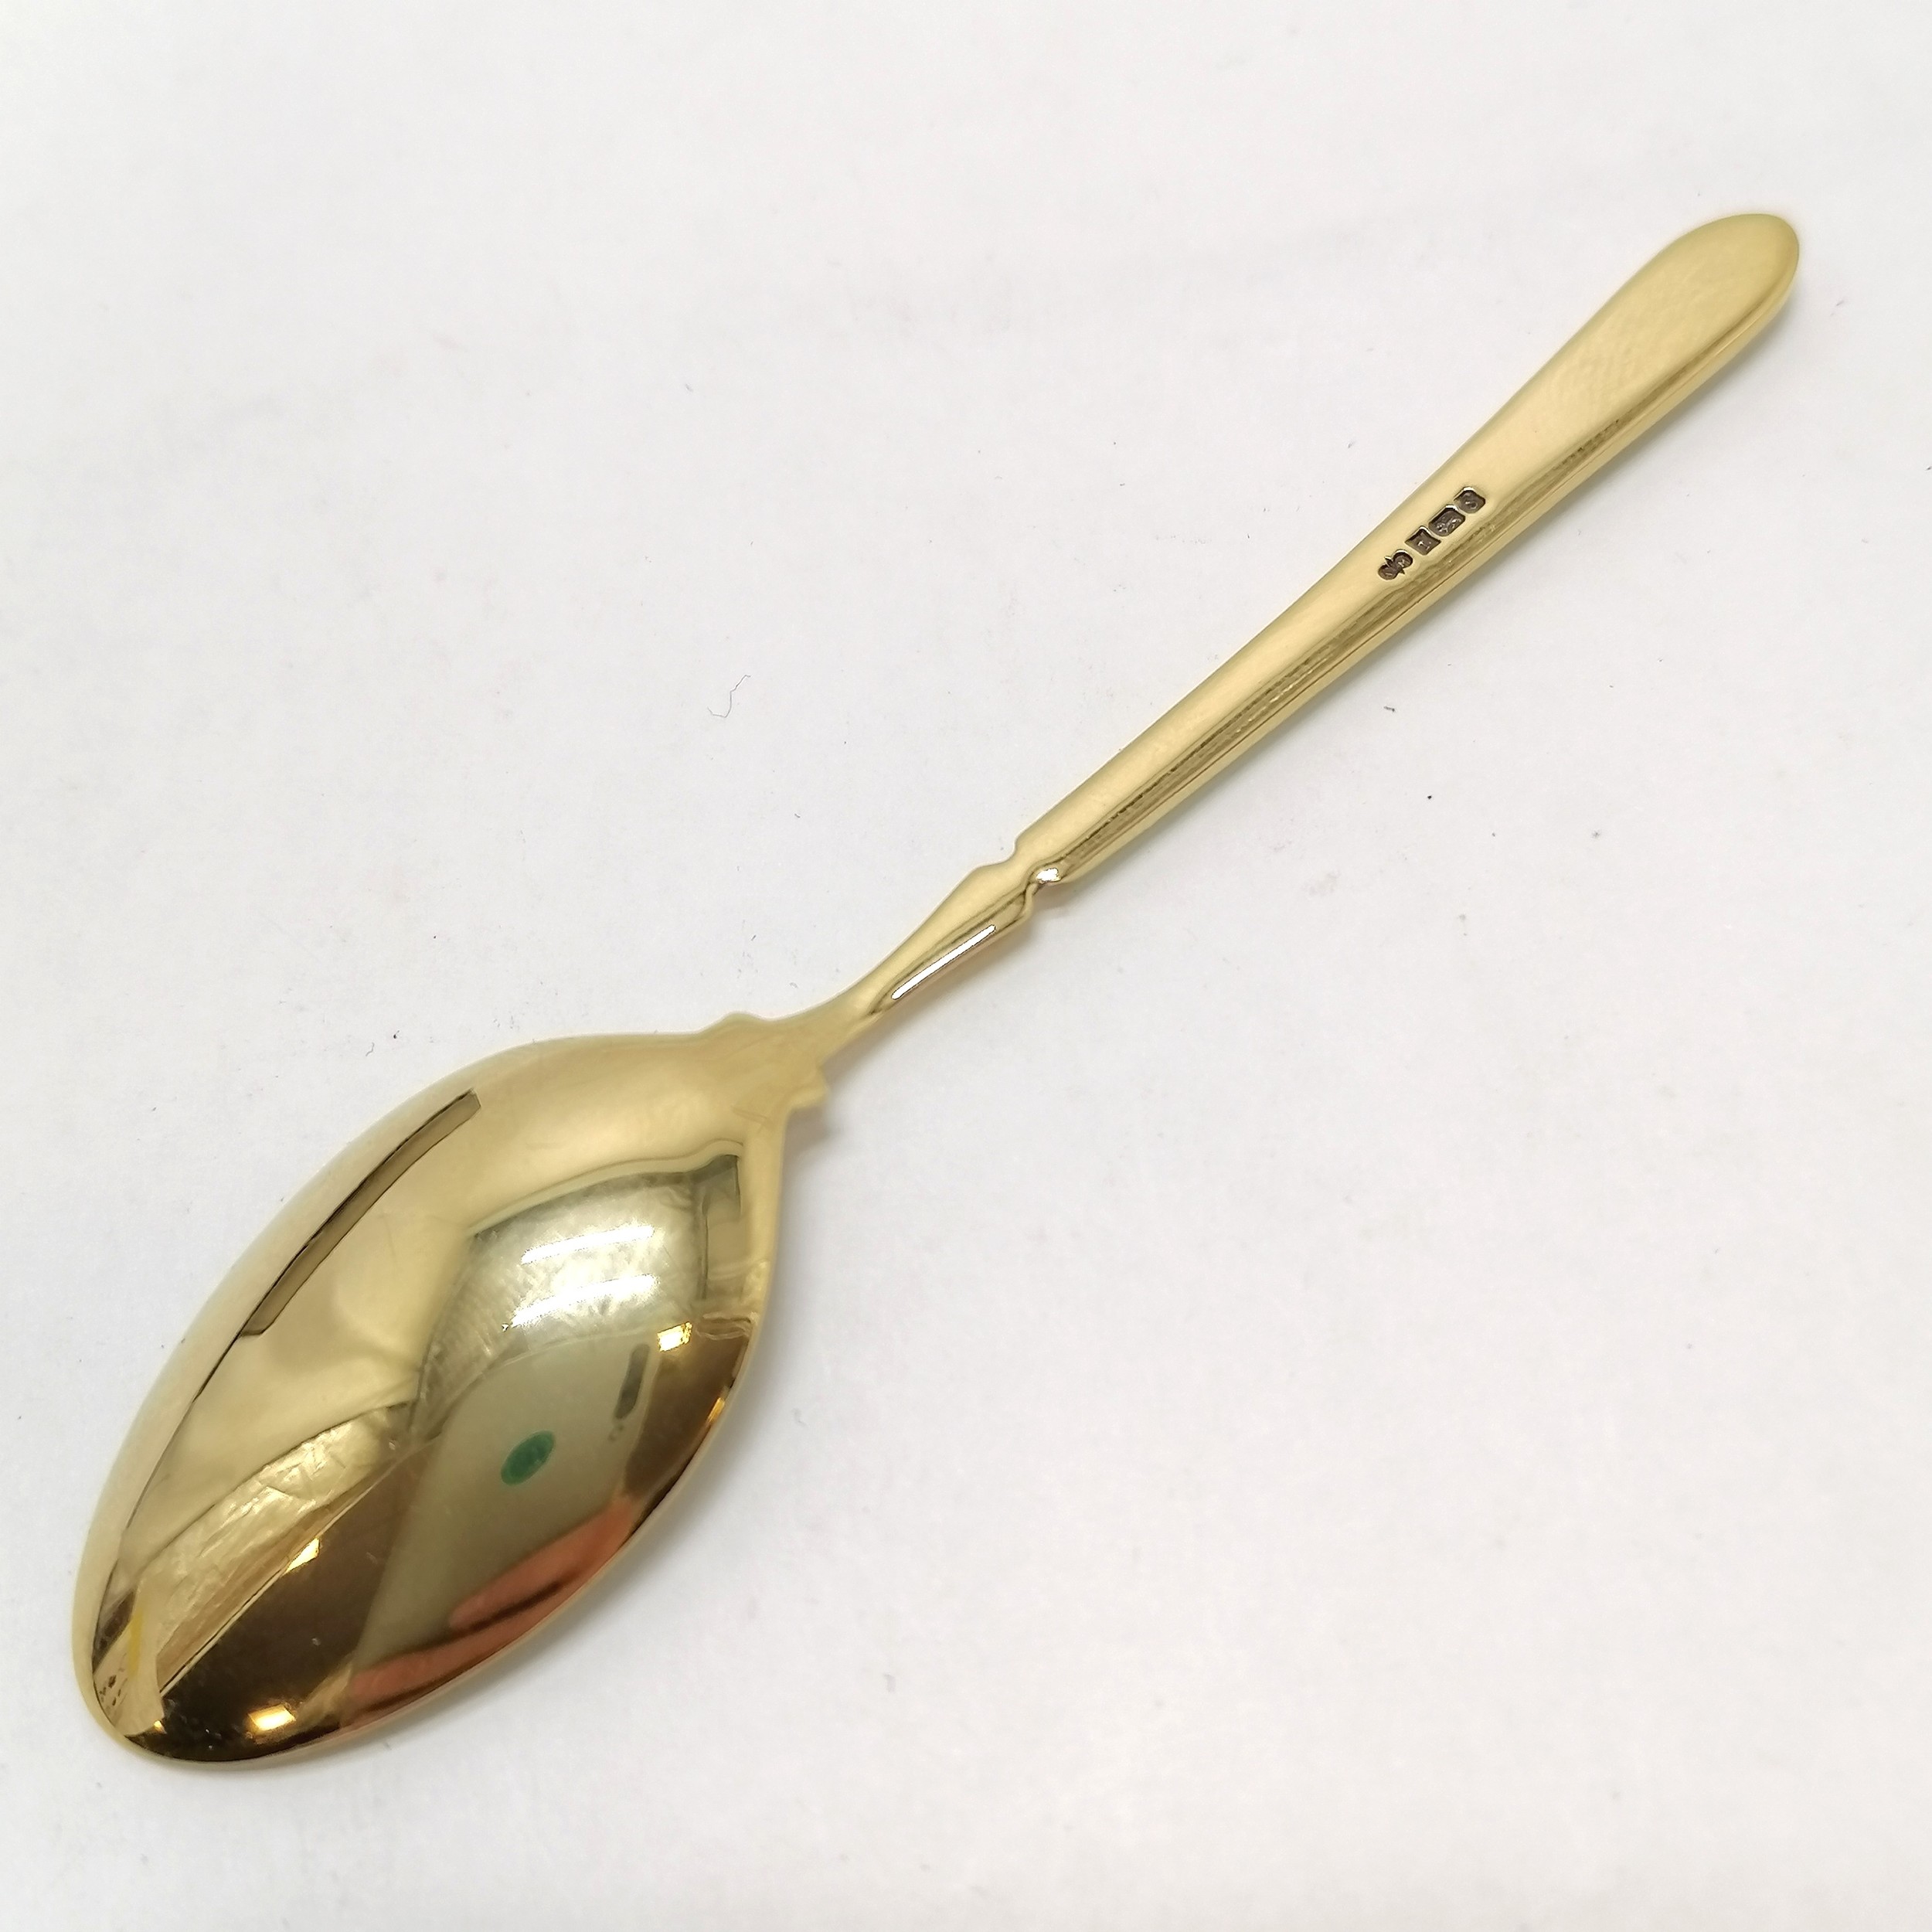 Sterling silver 'The Worshipful Society of Apothecaries' enamel spoon with Dürer's Rhinoceros - Image 4 of 4